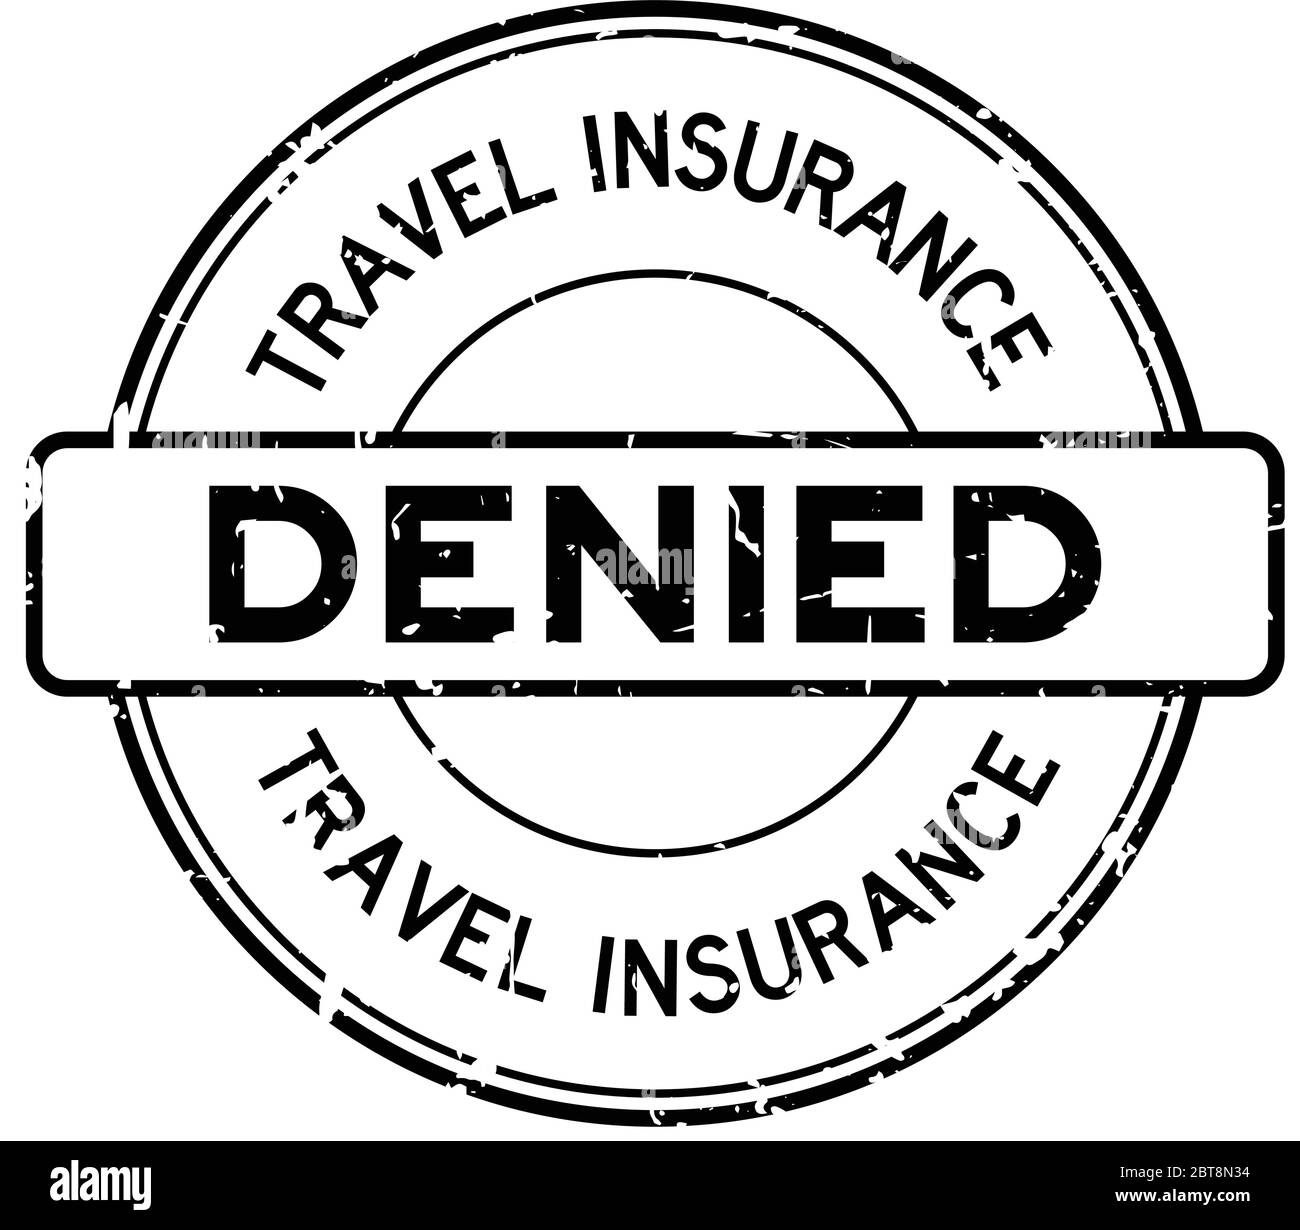 Grunge black travel insurance approved round rubber seal stamp on white background Stock Vector